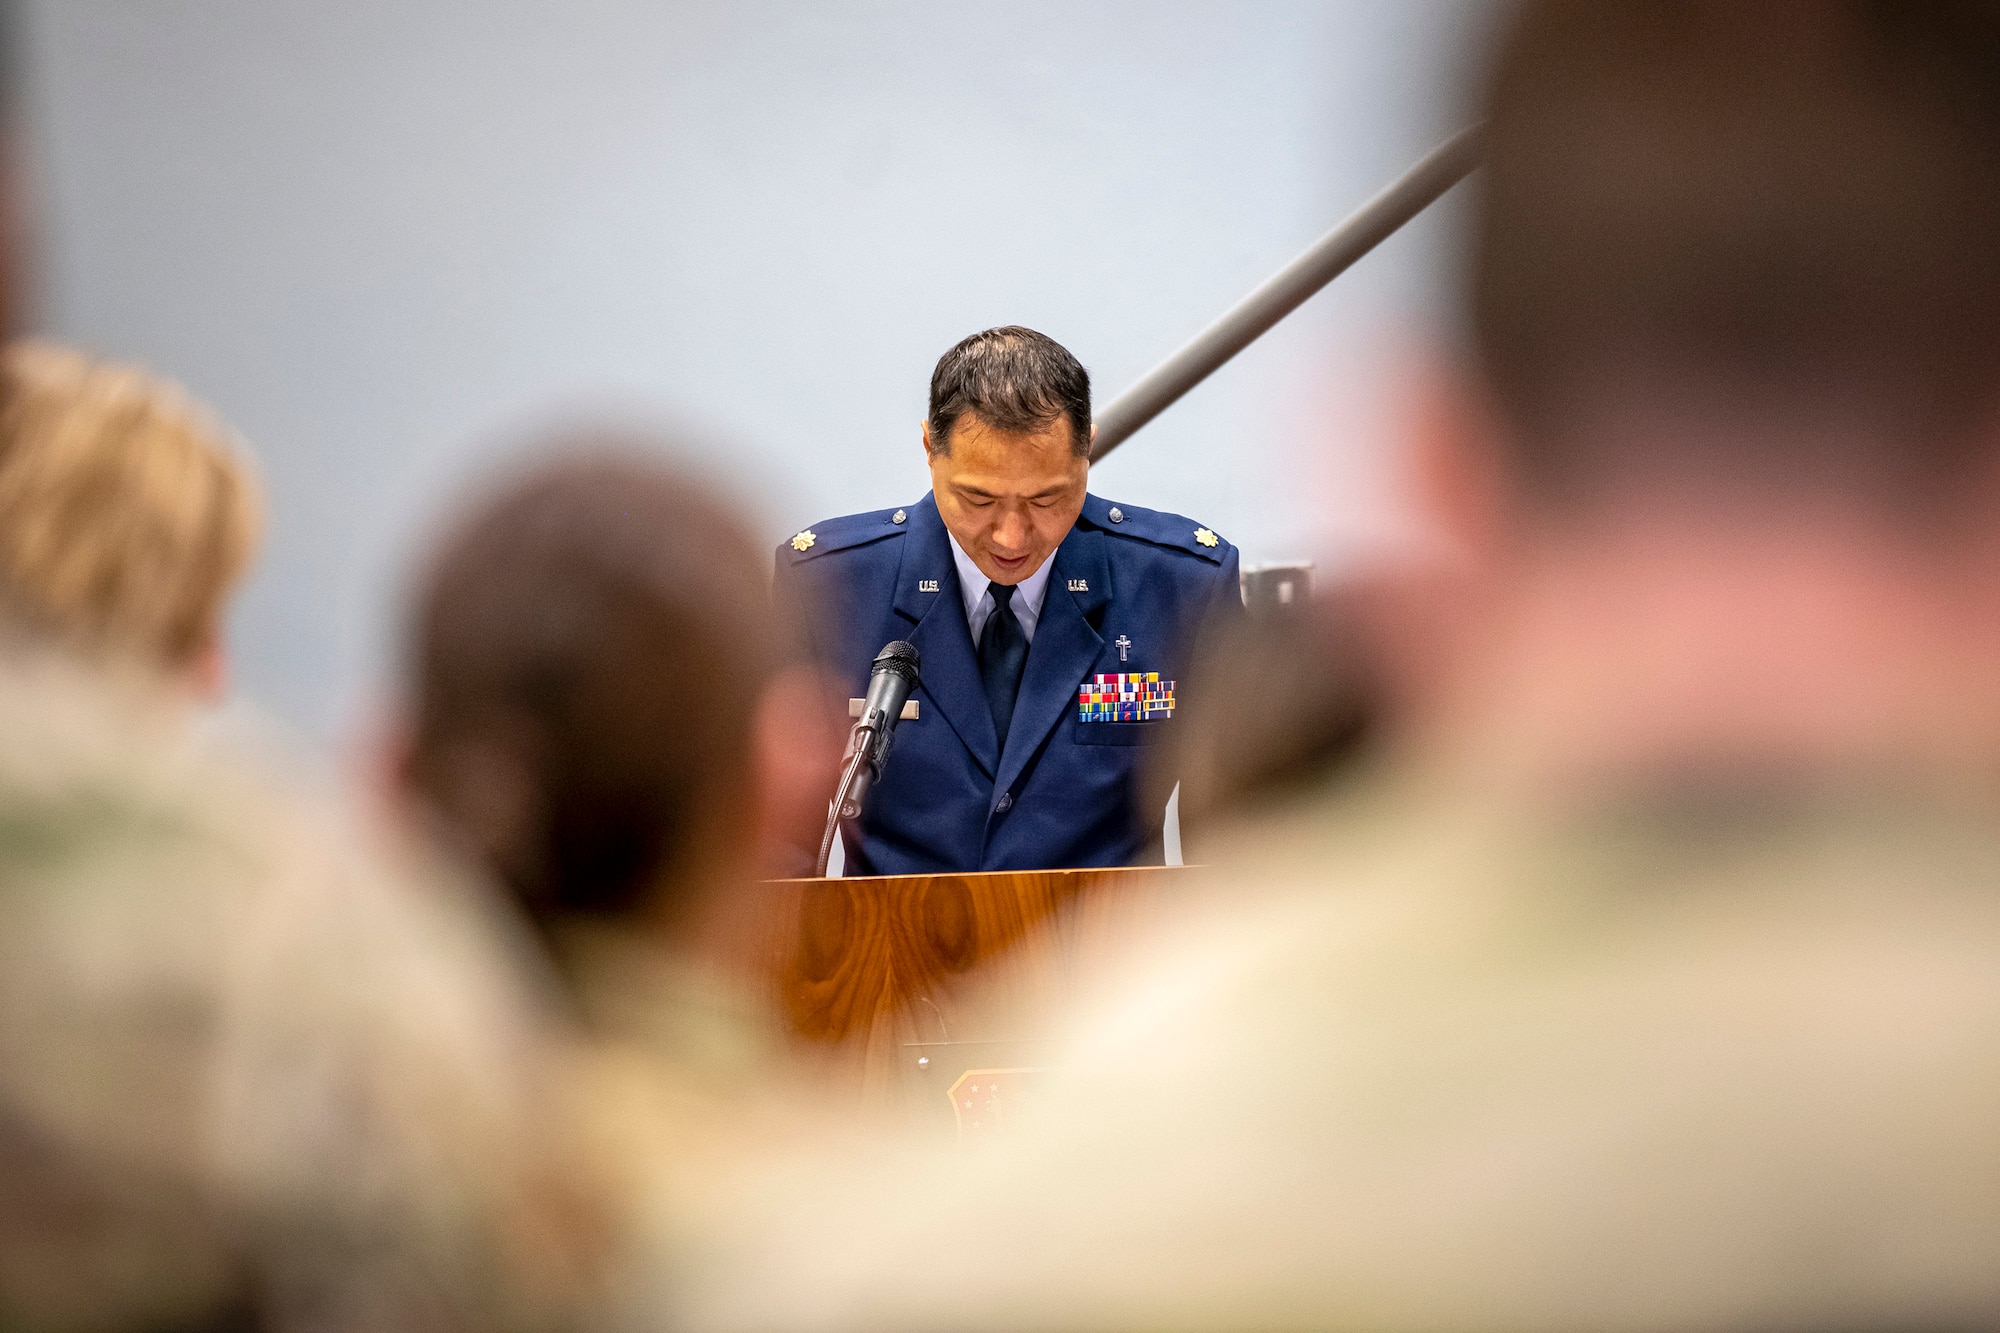 U.S. Air Force Maj. Myung Cho, 501st Combat Support Wing deputy wing chaplain, speaks during a 9/11 retreat ceremony at RAF Croughton, England, Sep 9, 2022. Airmen and guests participated in the ceremony to honor those who lost their lives during the September 11th terrorist attacks. (U.S. Air Force photo by Staff Sgt. Eugene Oliver)